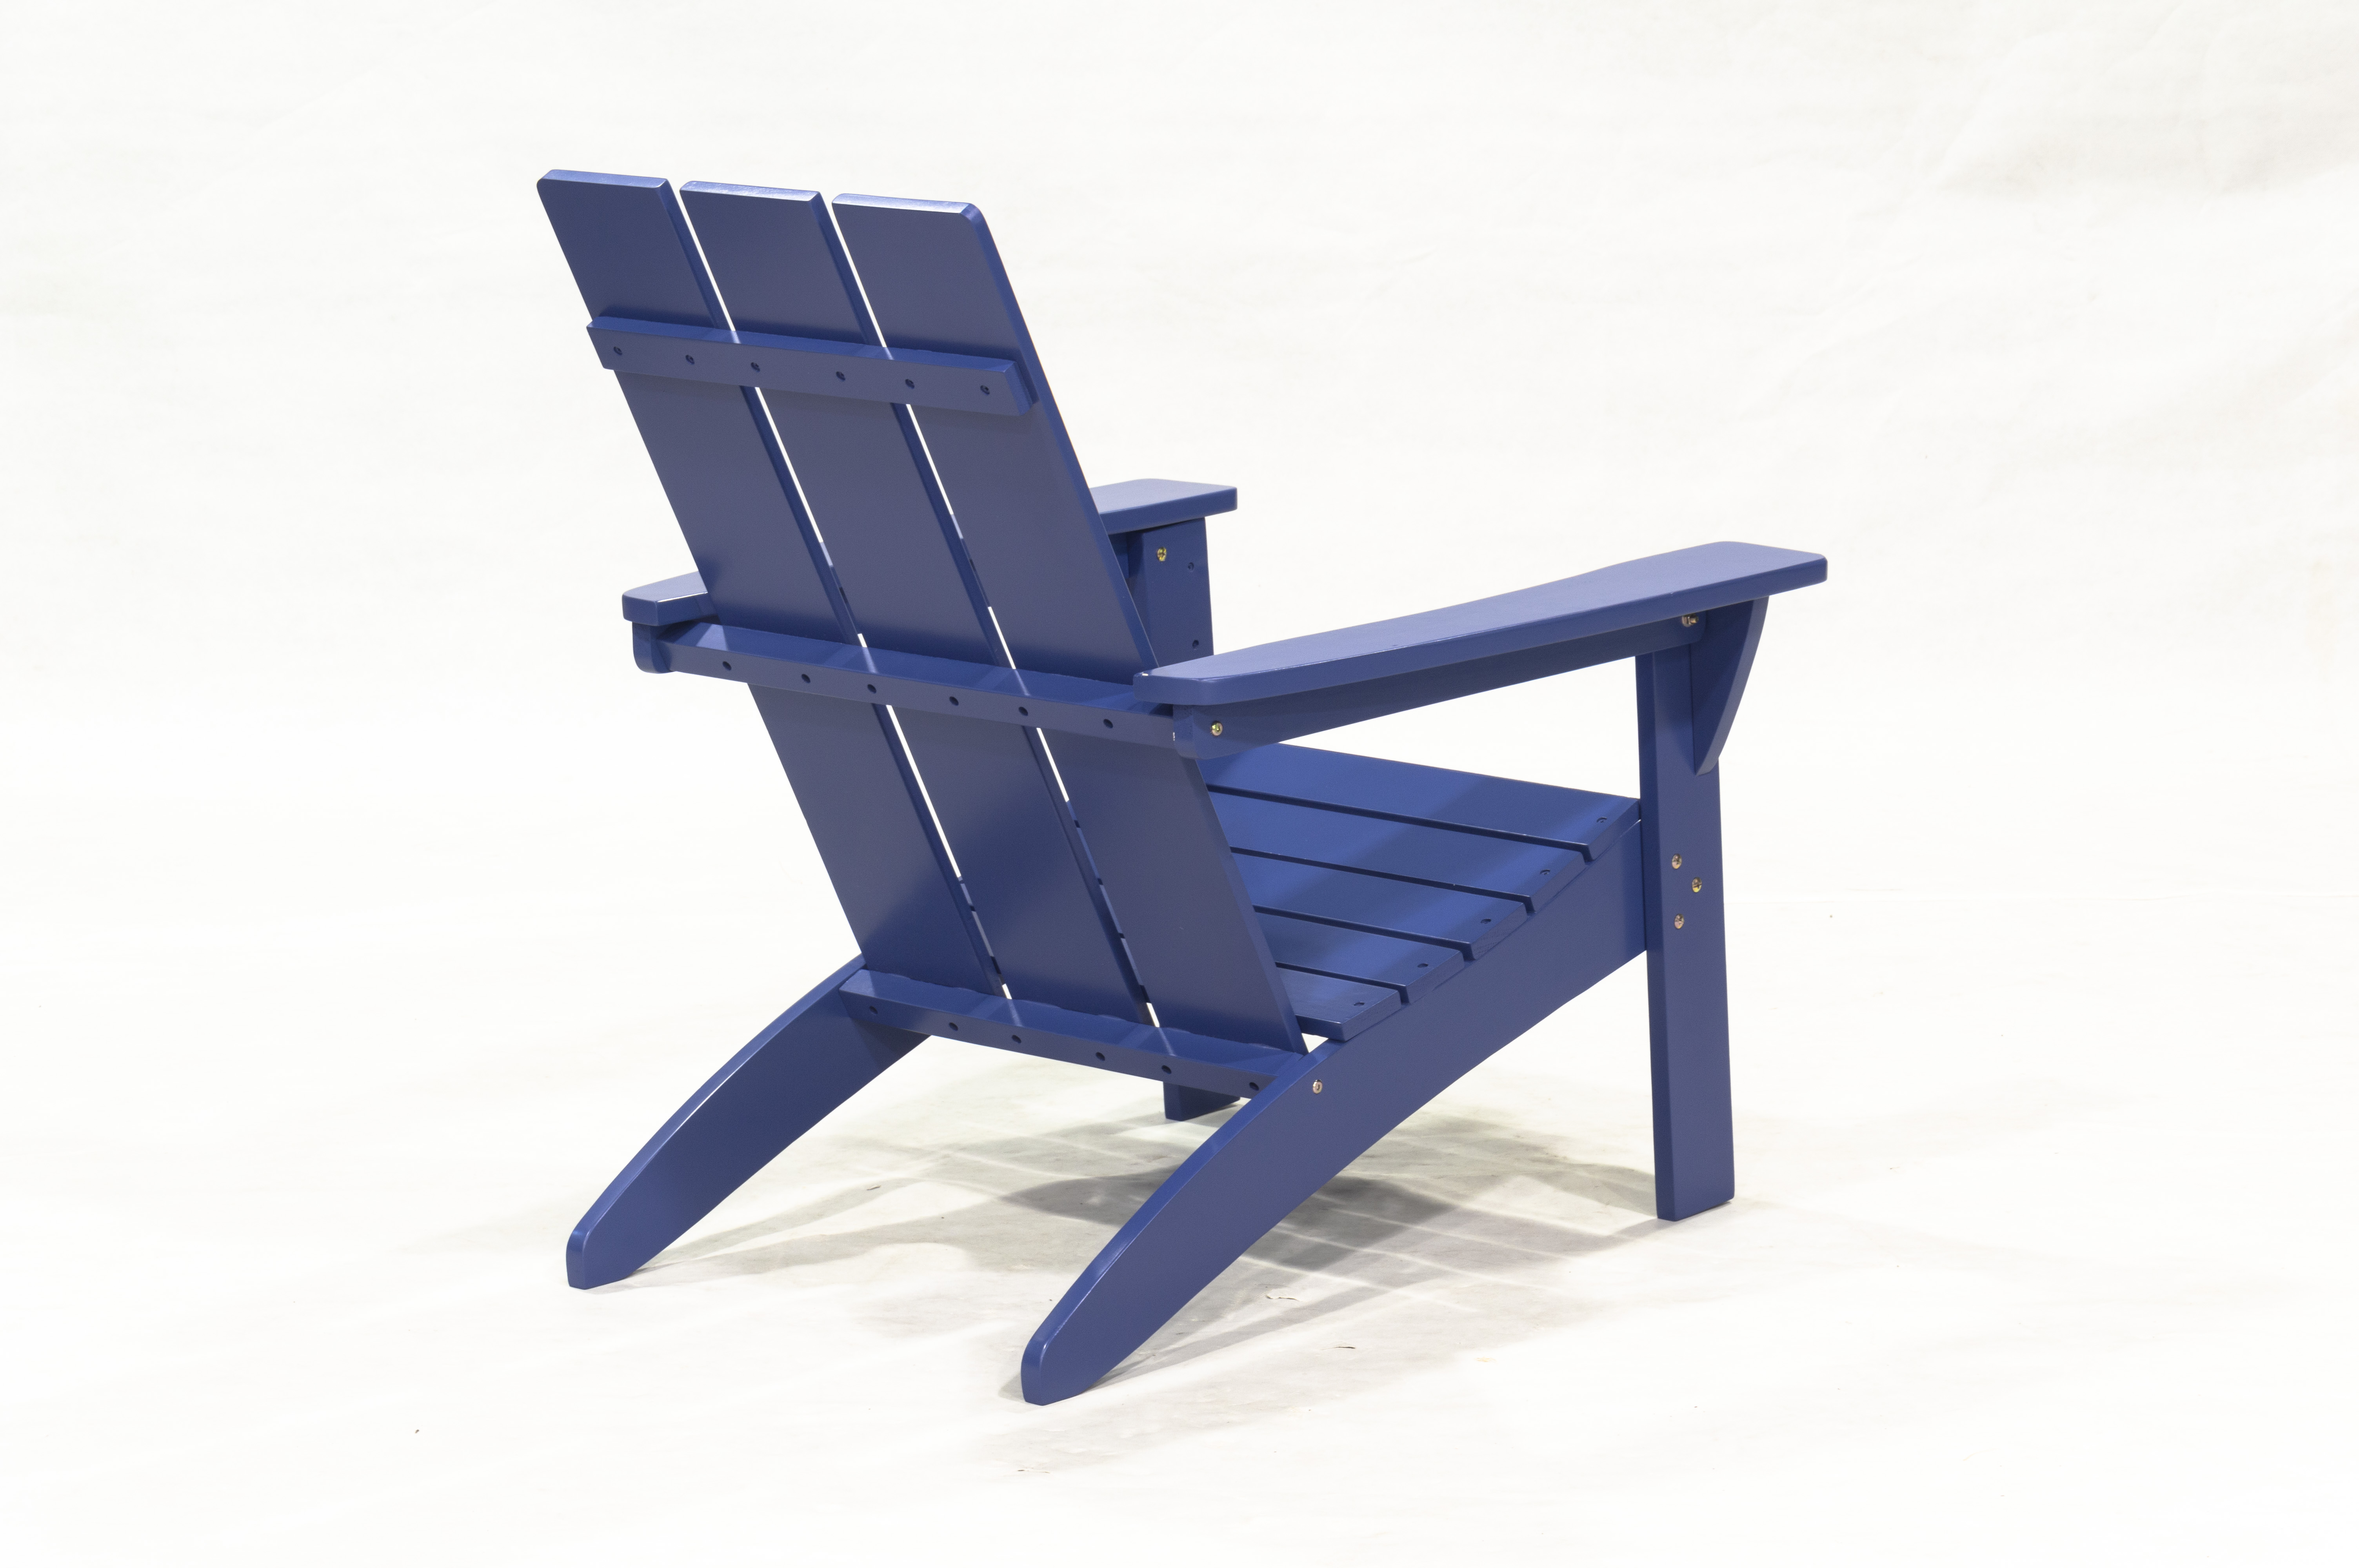 Outdoor Patio Garden Furniture 3-Piece Wood Adirondack Chair Set, Weather Resistant Finish,2 Adirondack Chairs and 1 Side Table-Blue - image 3 of 11